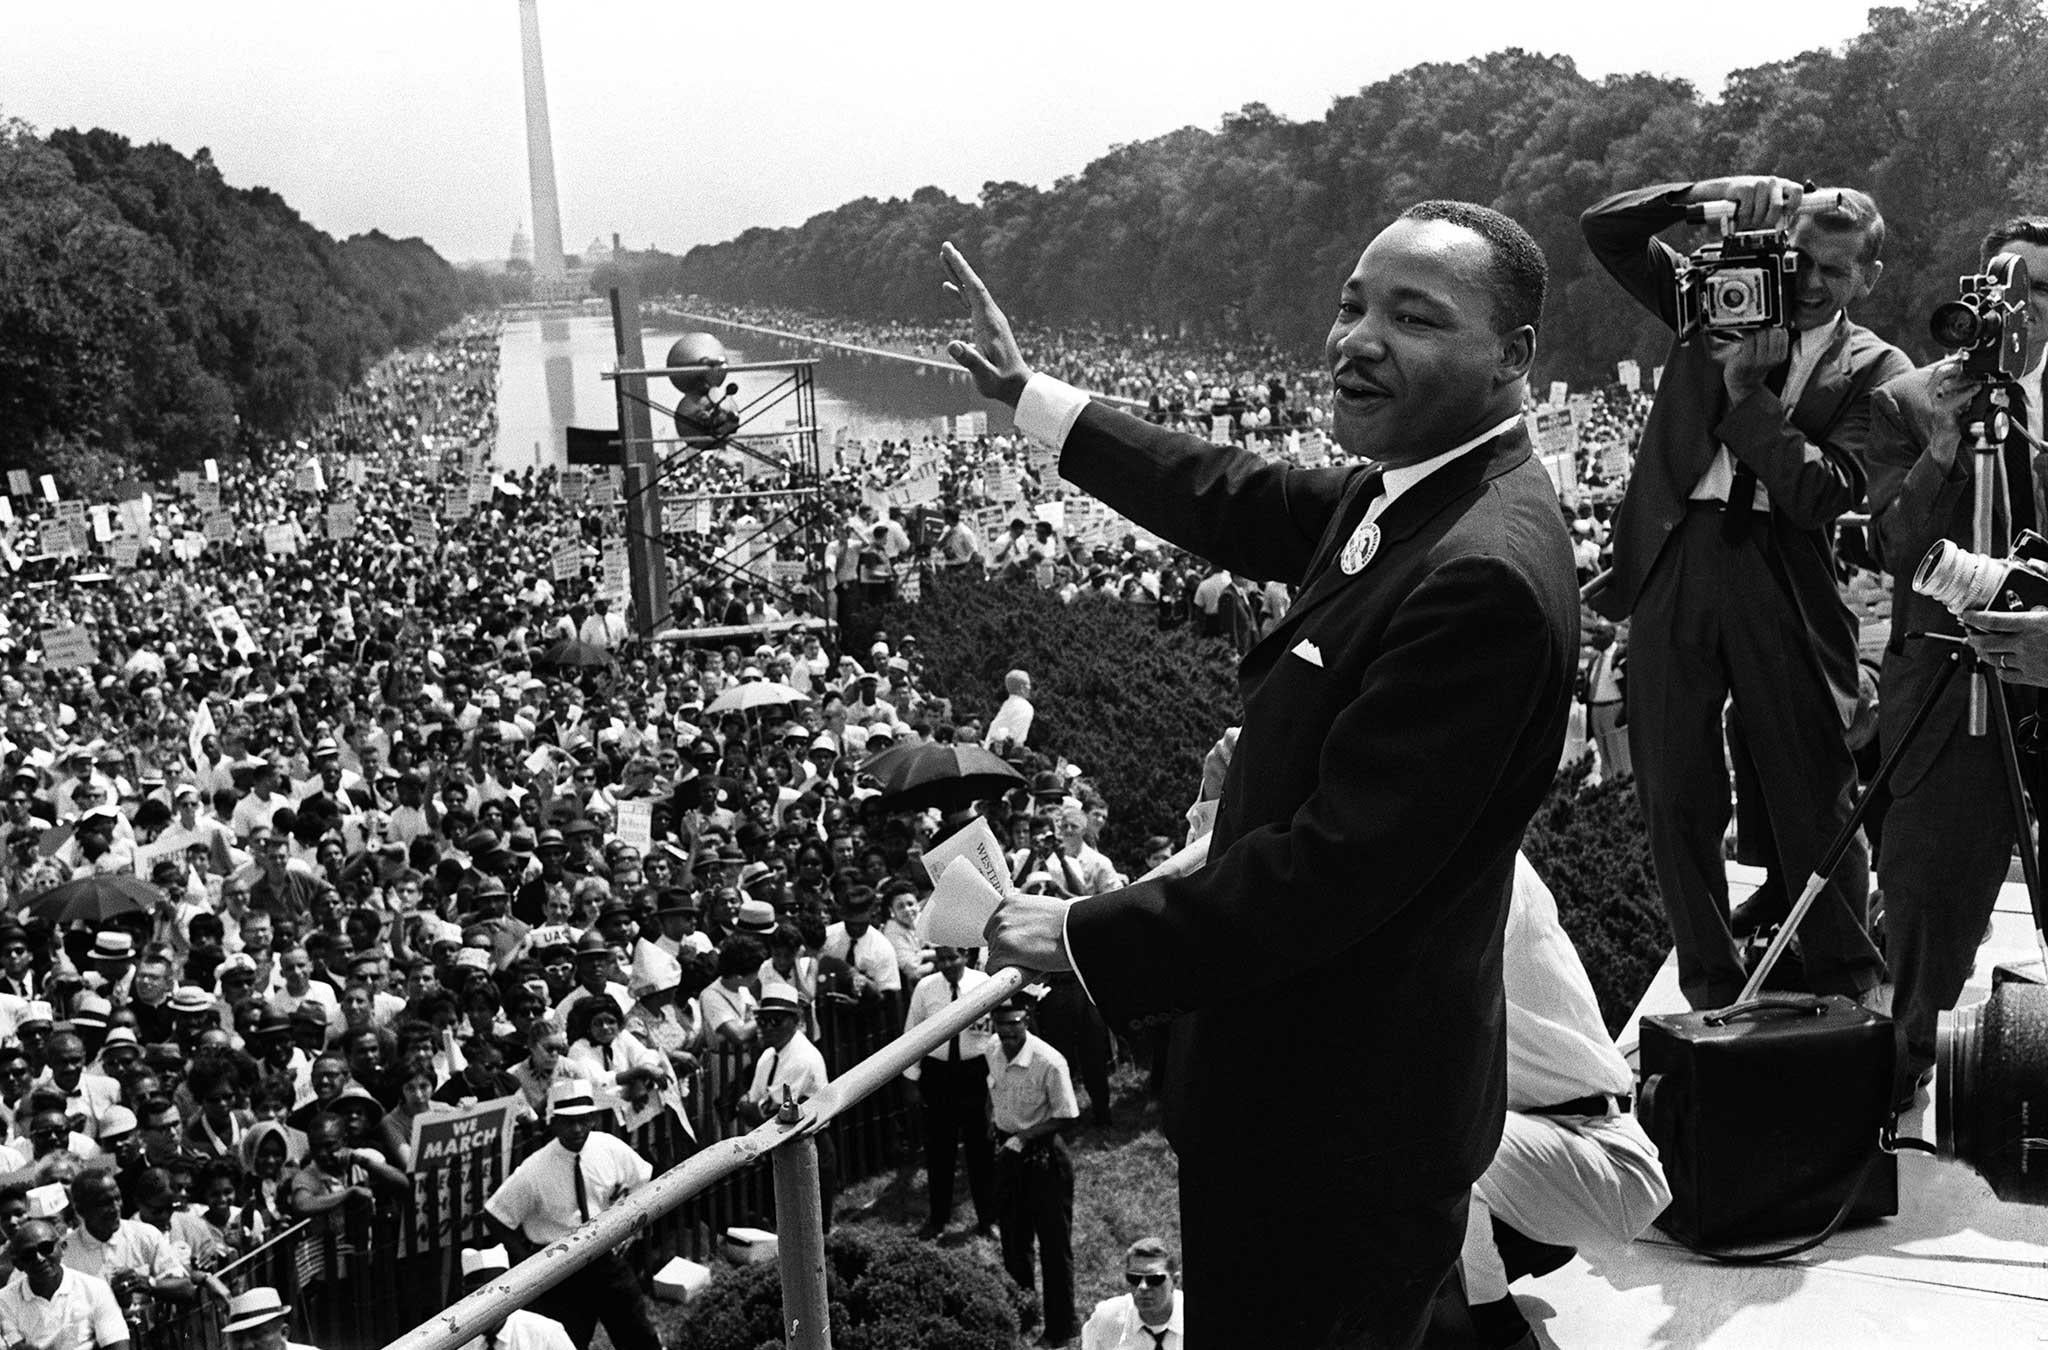 Memories of a March and a Dream: Martin Luther King during the March on Washington, on 28 August 1963